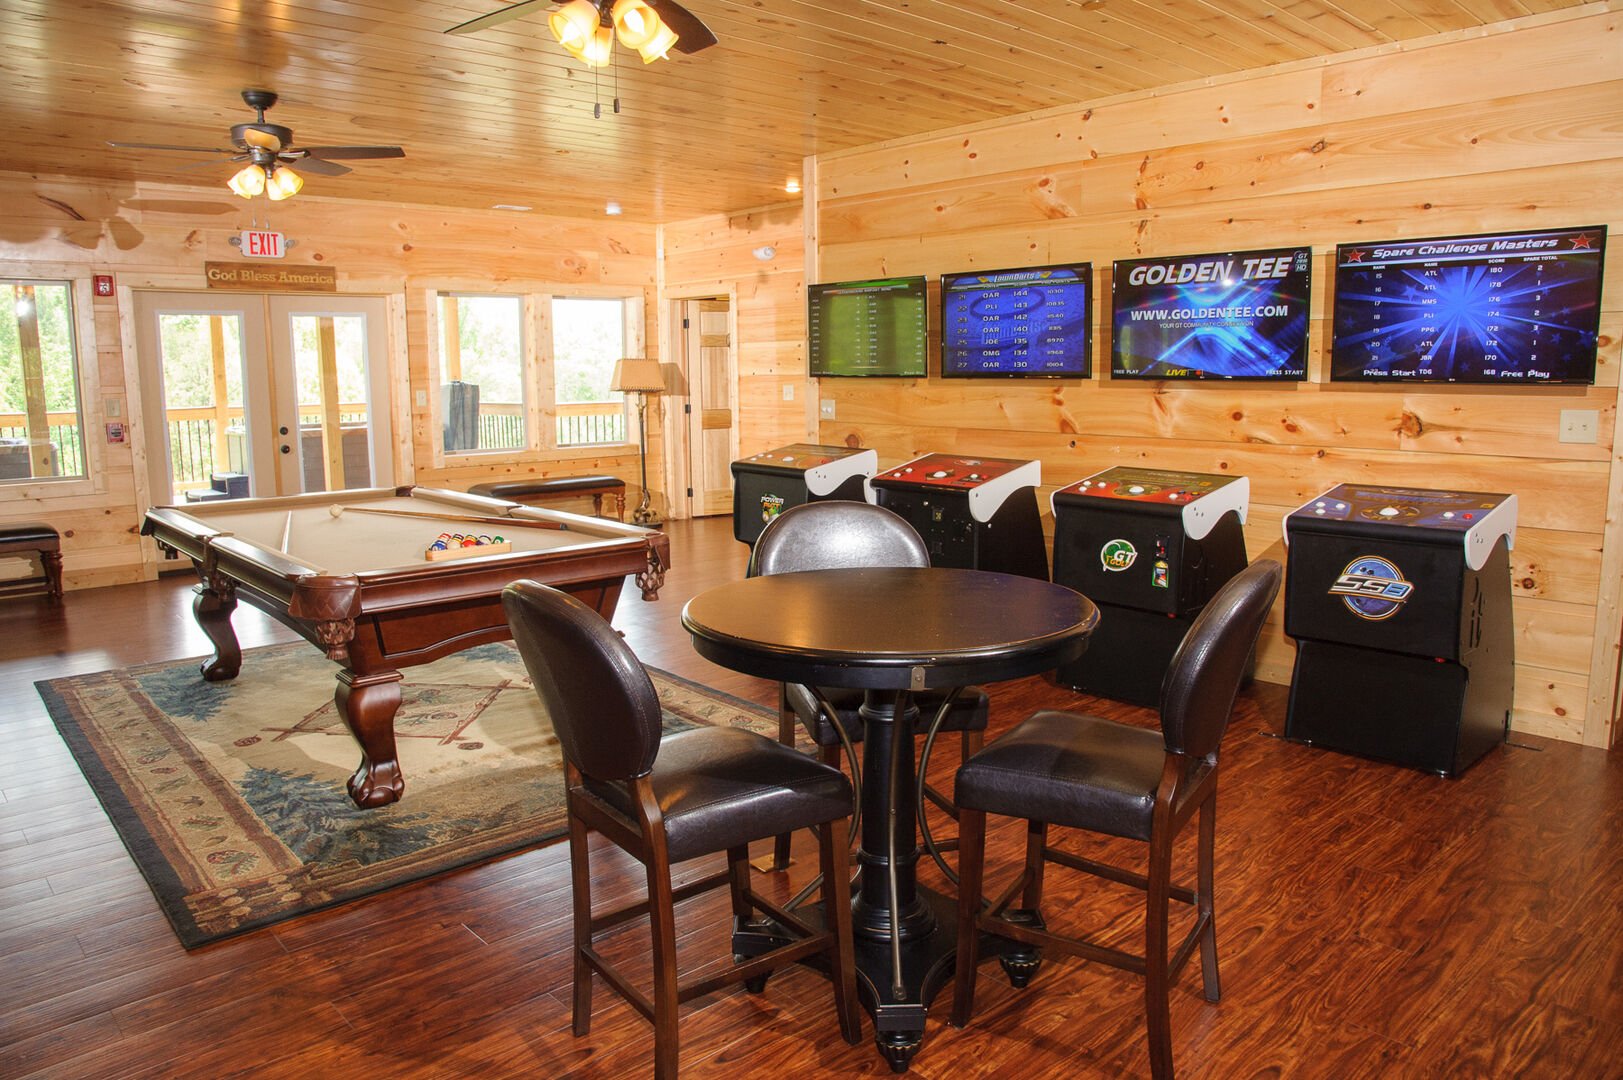 Game room with seating, arcade cabinets, and a pool table.